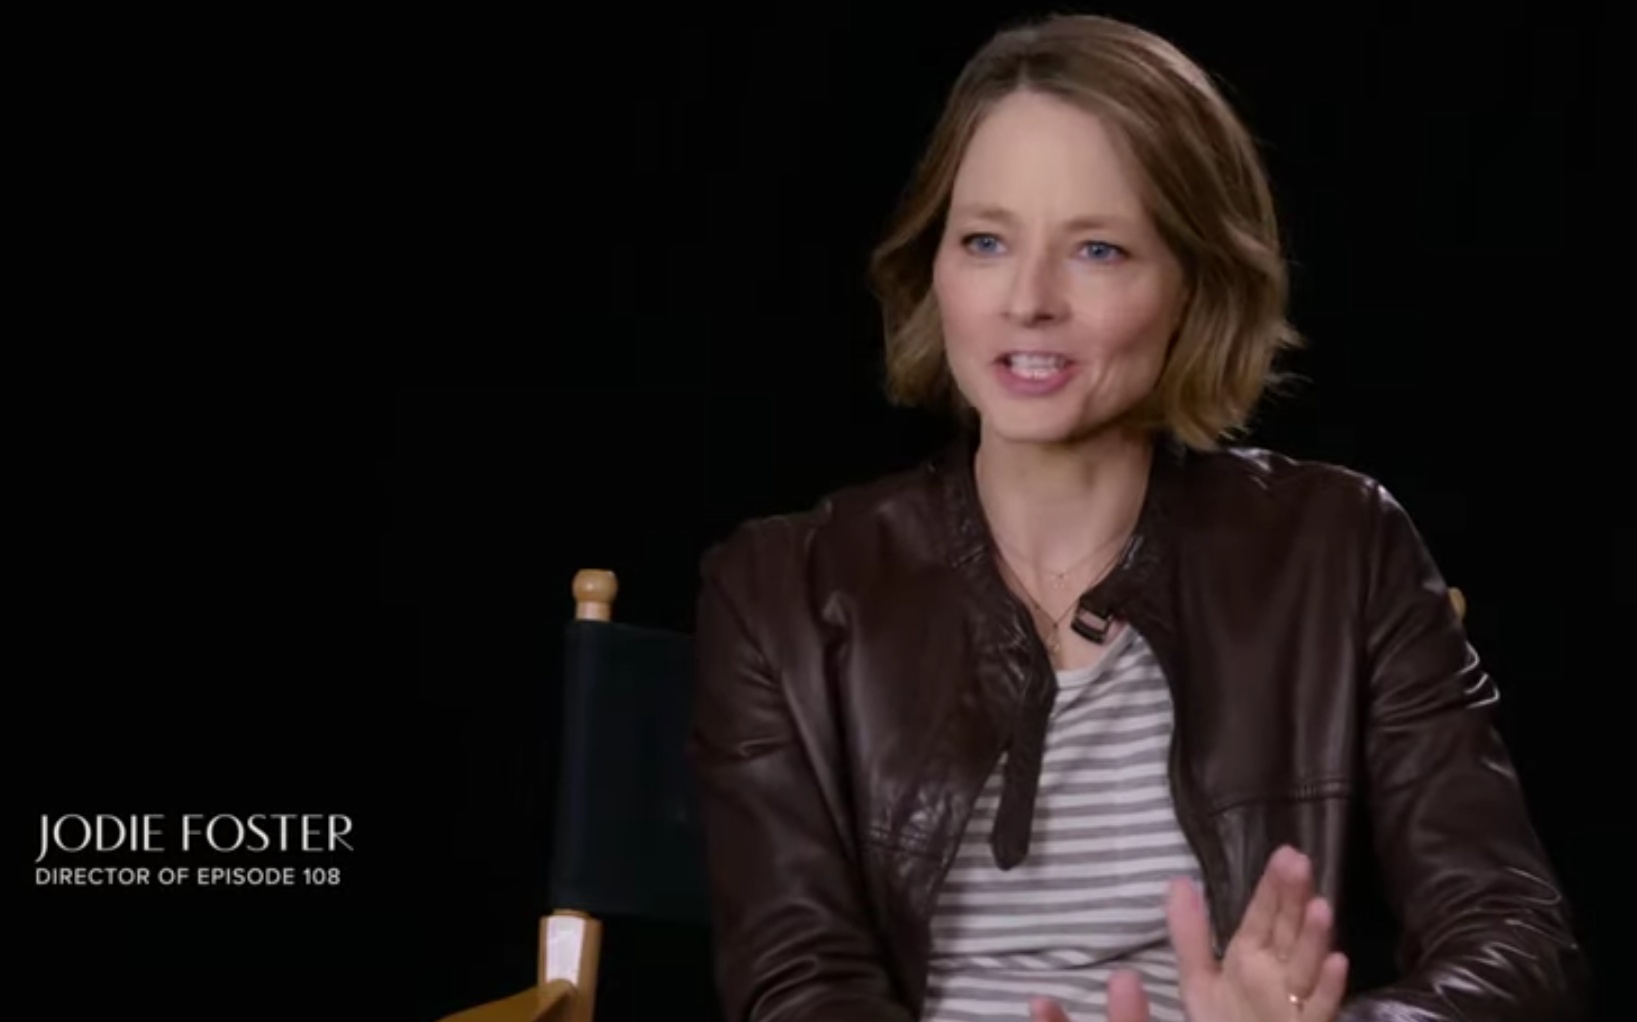 https://static.wikia.nocookie.net/talesfromtheloopexplores/images/e/ed/Jodie_Foster_Director.jpg/revision/latest?cb=20200318230415